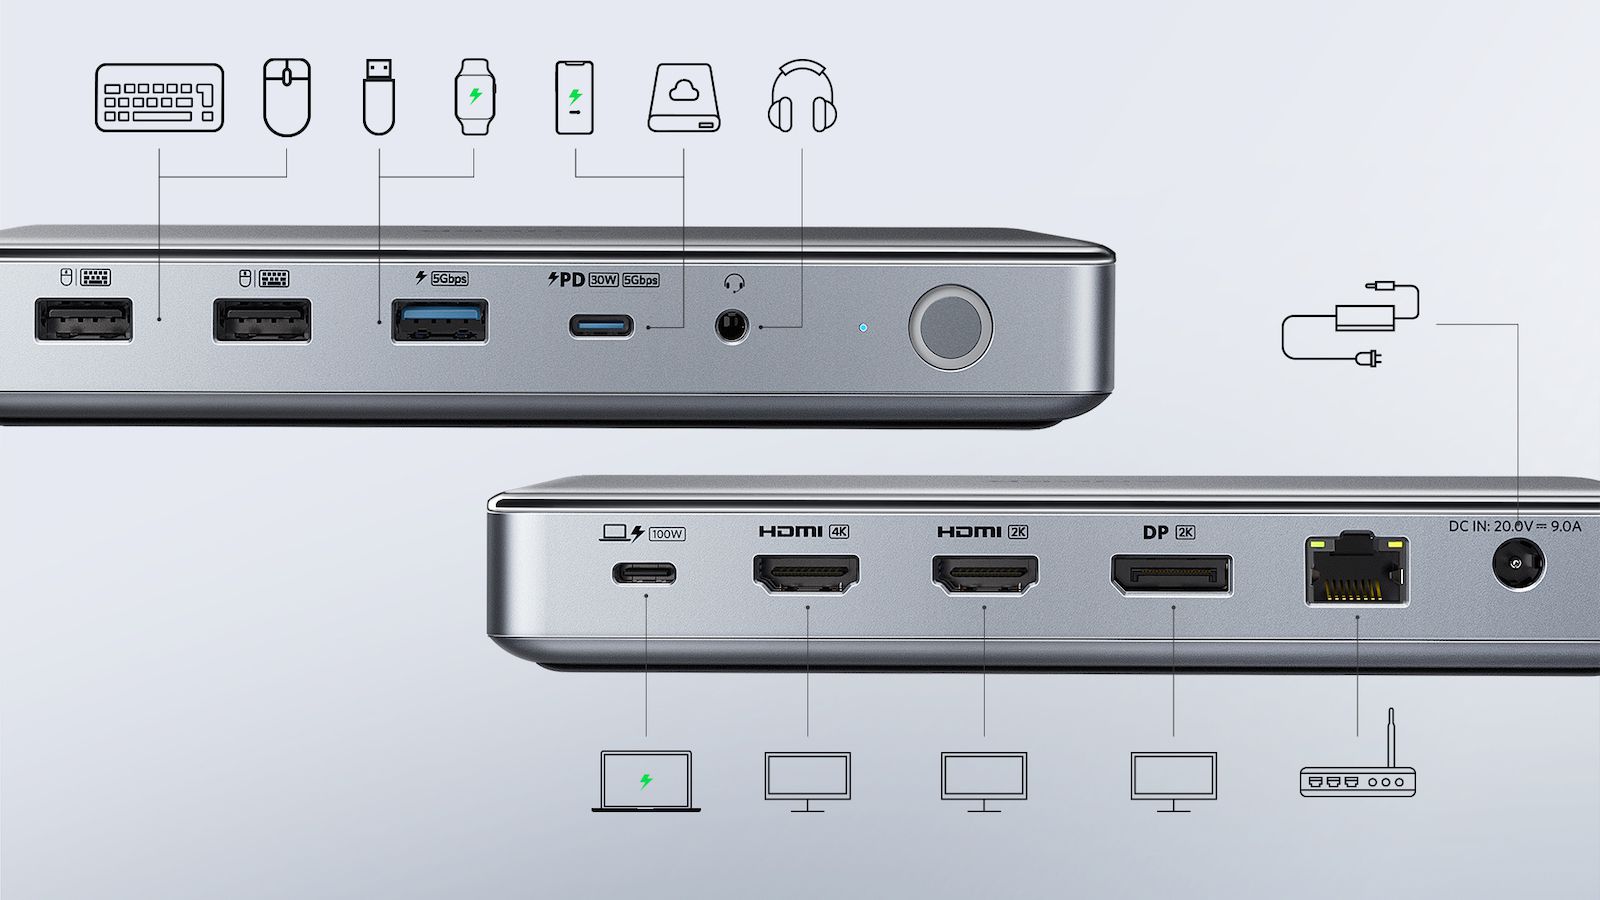 Anker's Latest USB-C Docking Station Brings Triple-Display Support to M1 Macs